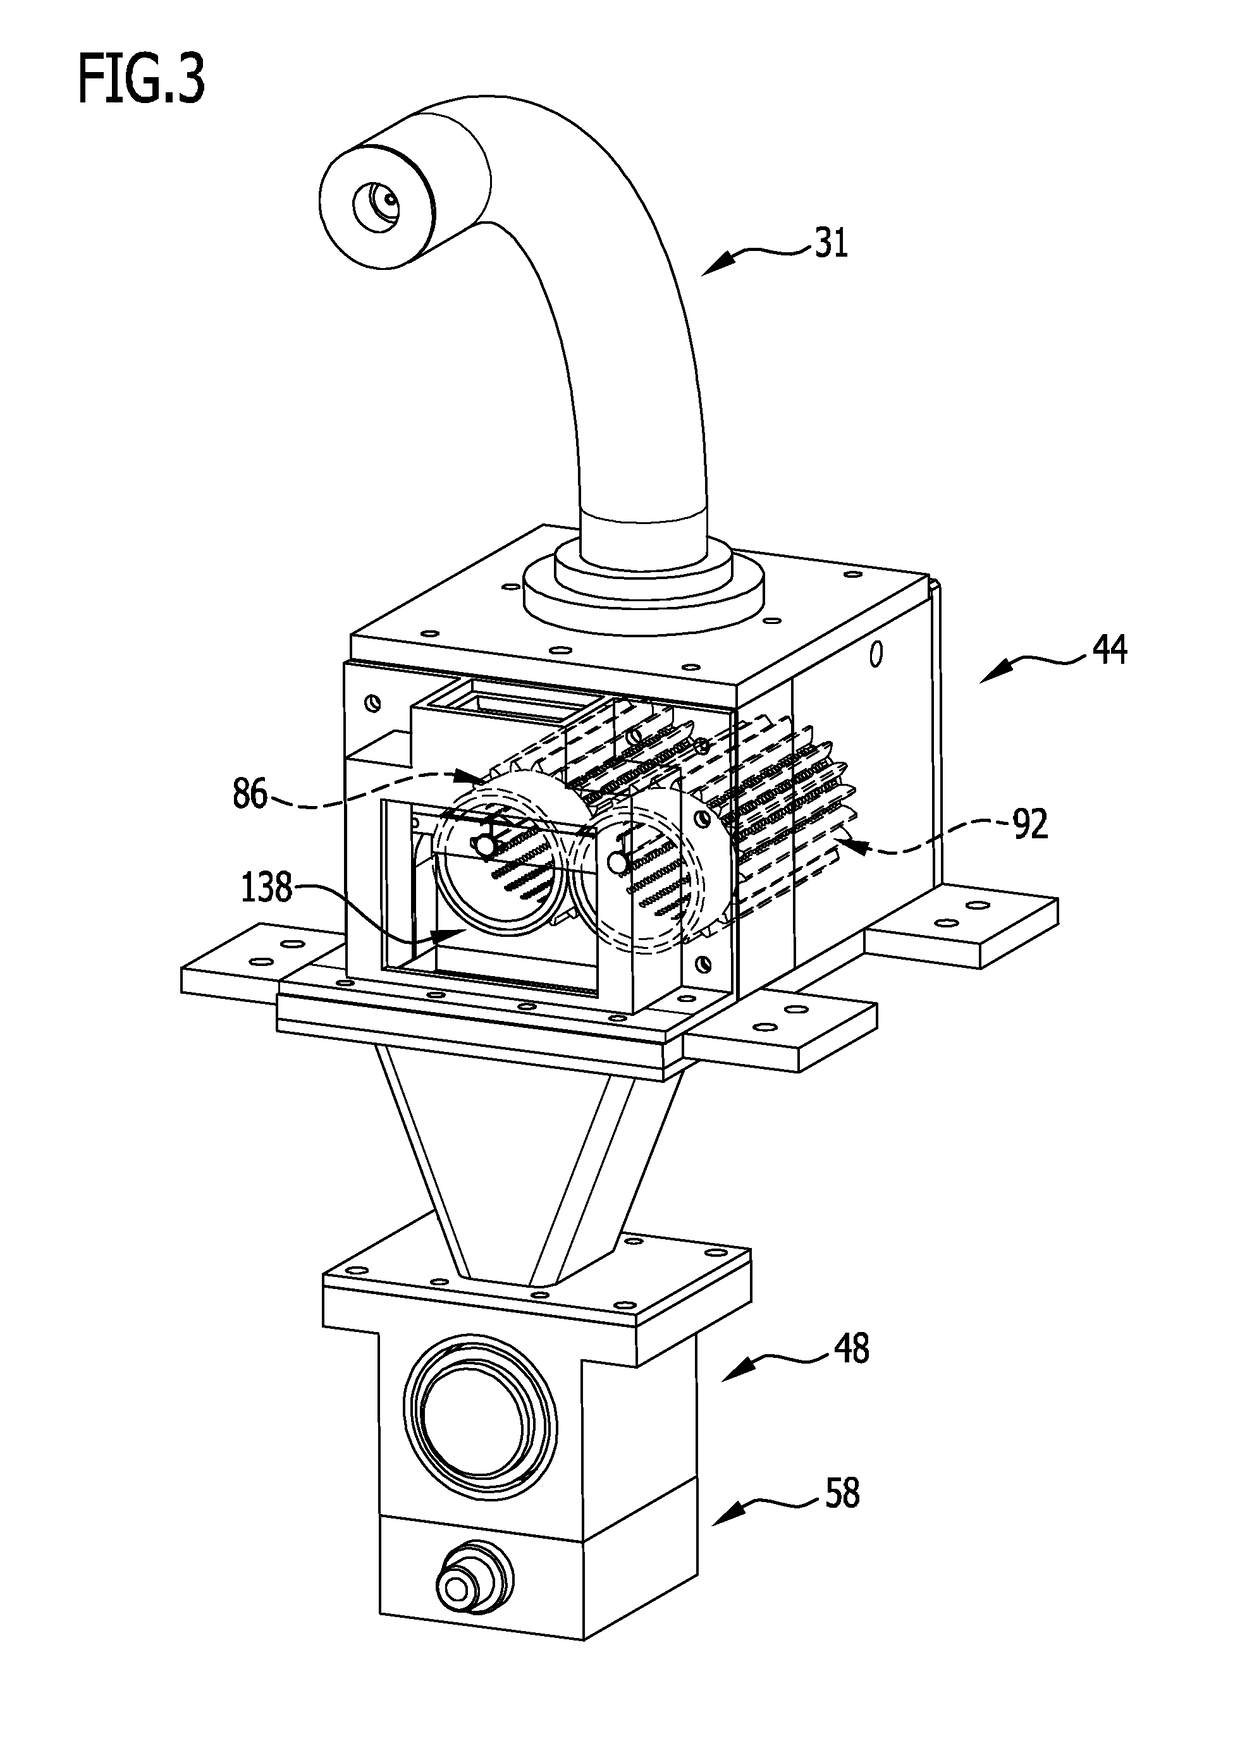 Device for producing co2 pellets from co2 snow and cleaning device